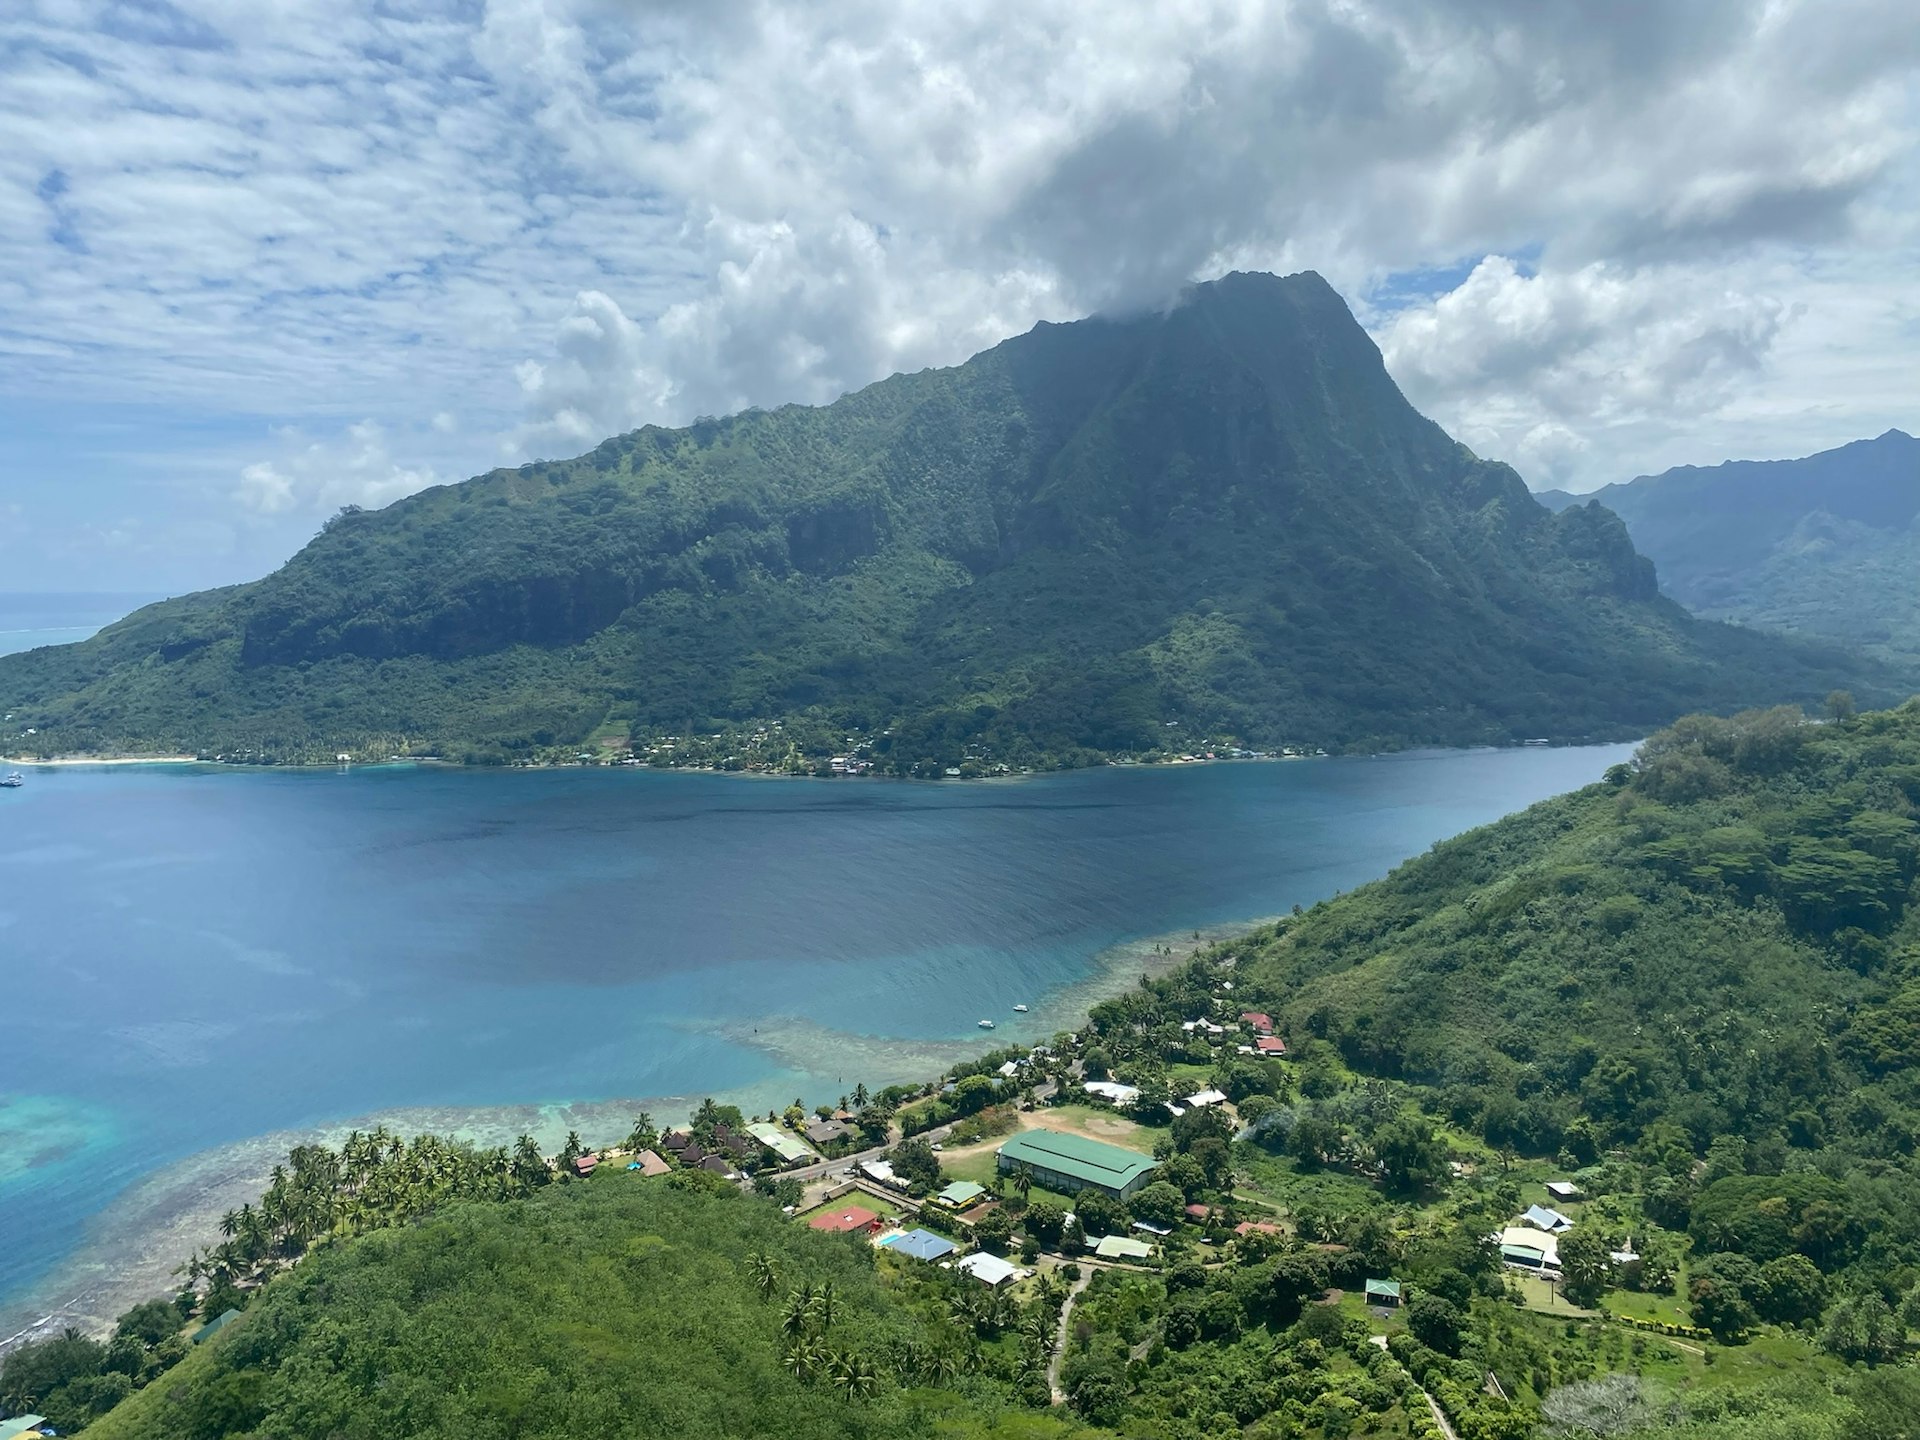 An aerial view of Mo'orea, a volcanic island in French Polynesia